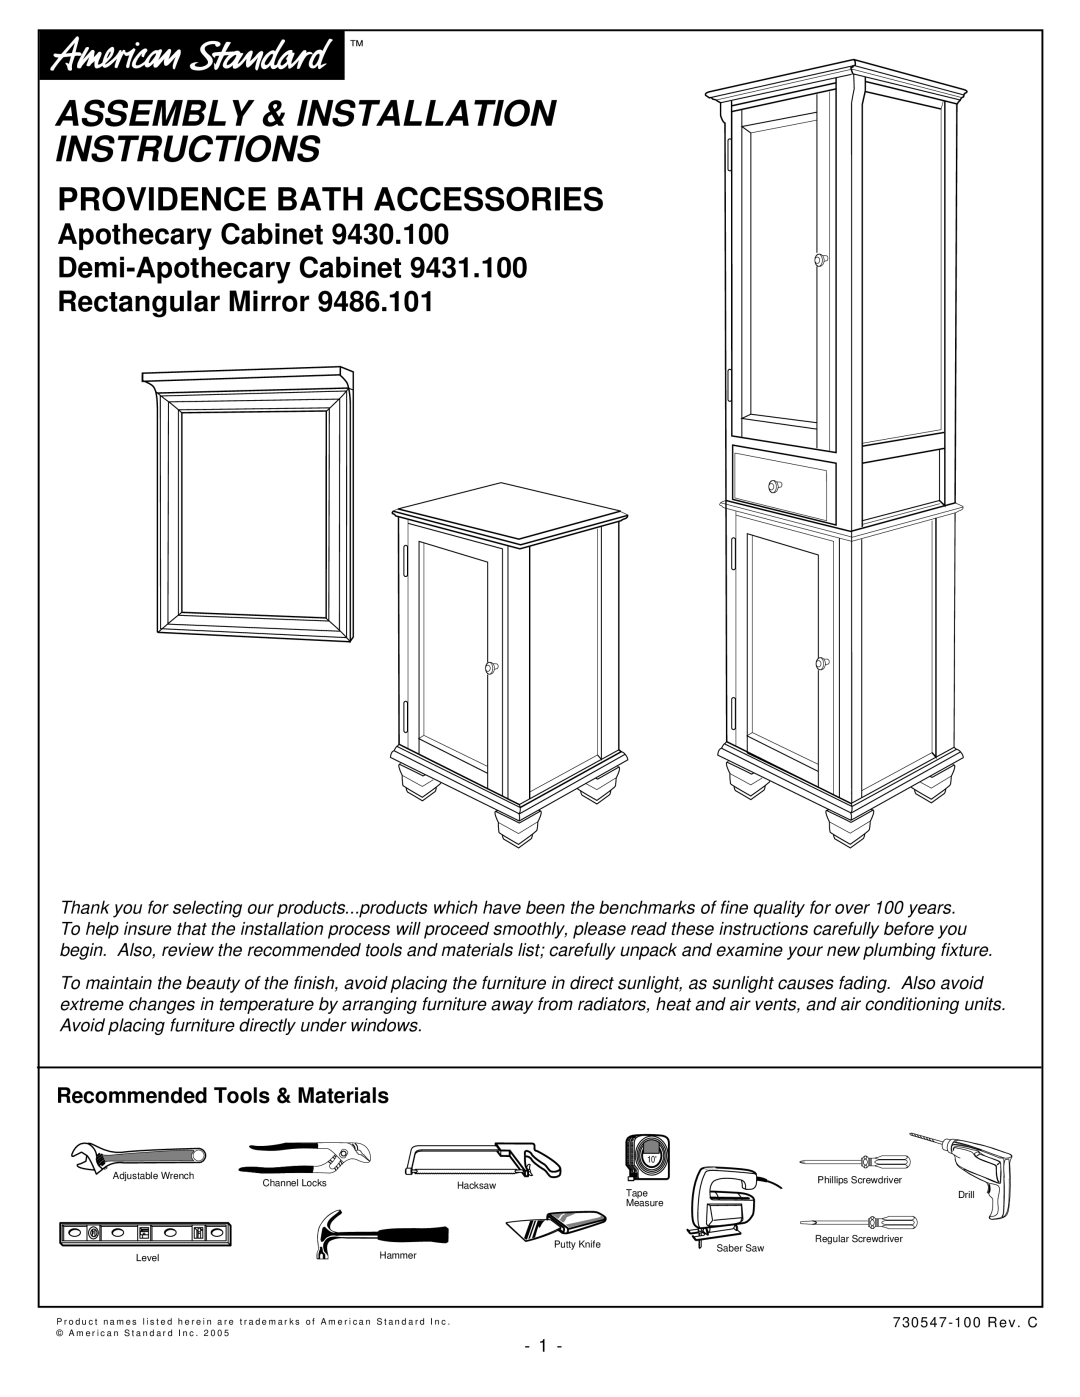 American Standard 9430.100 installation instructions Recommended Tools & Materials, Assembly & Installation Instructions 